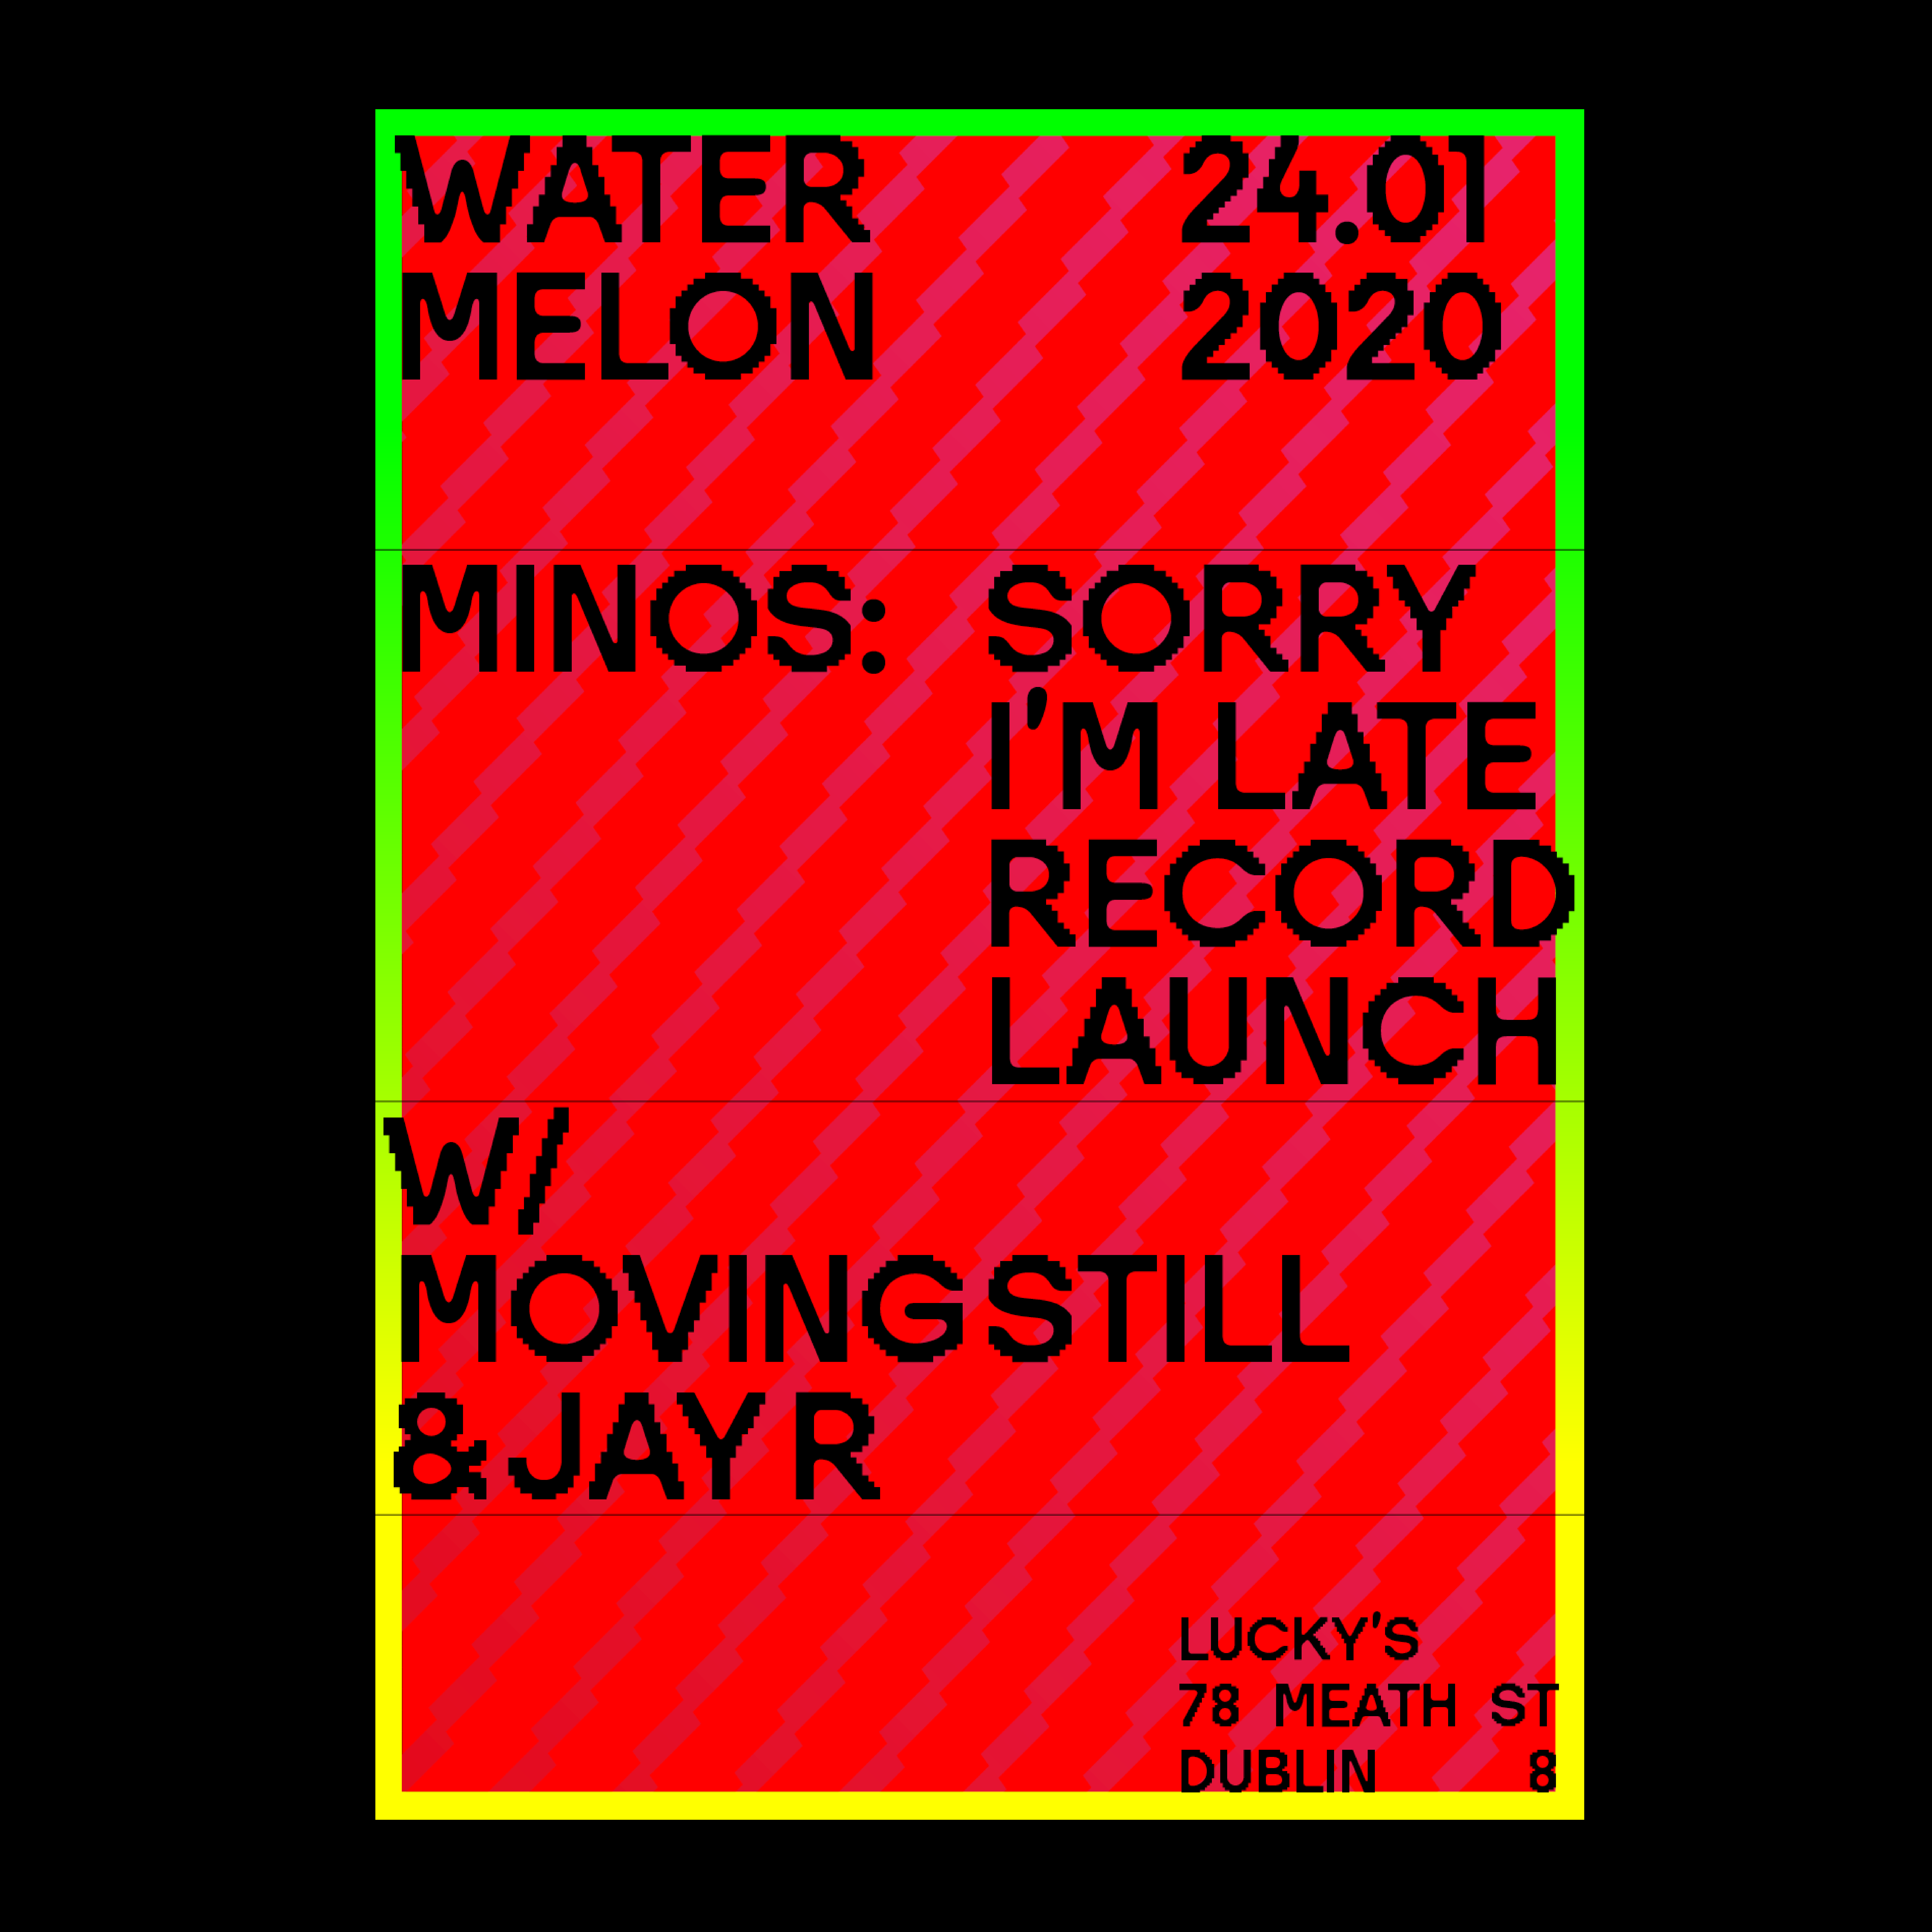 Watermelon Poster Minos Release Party